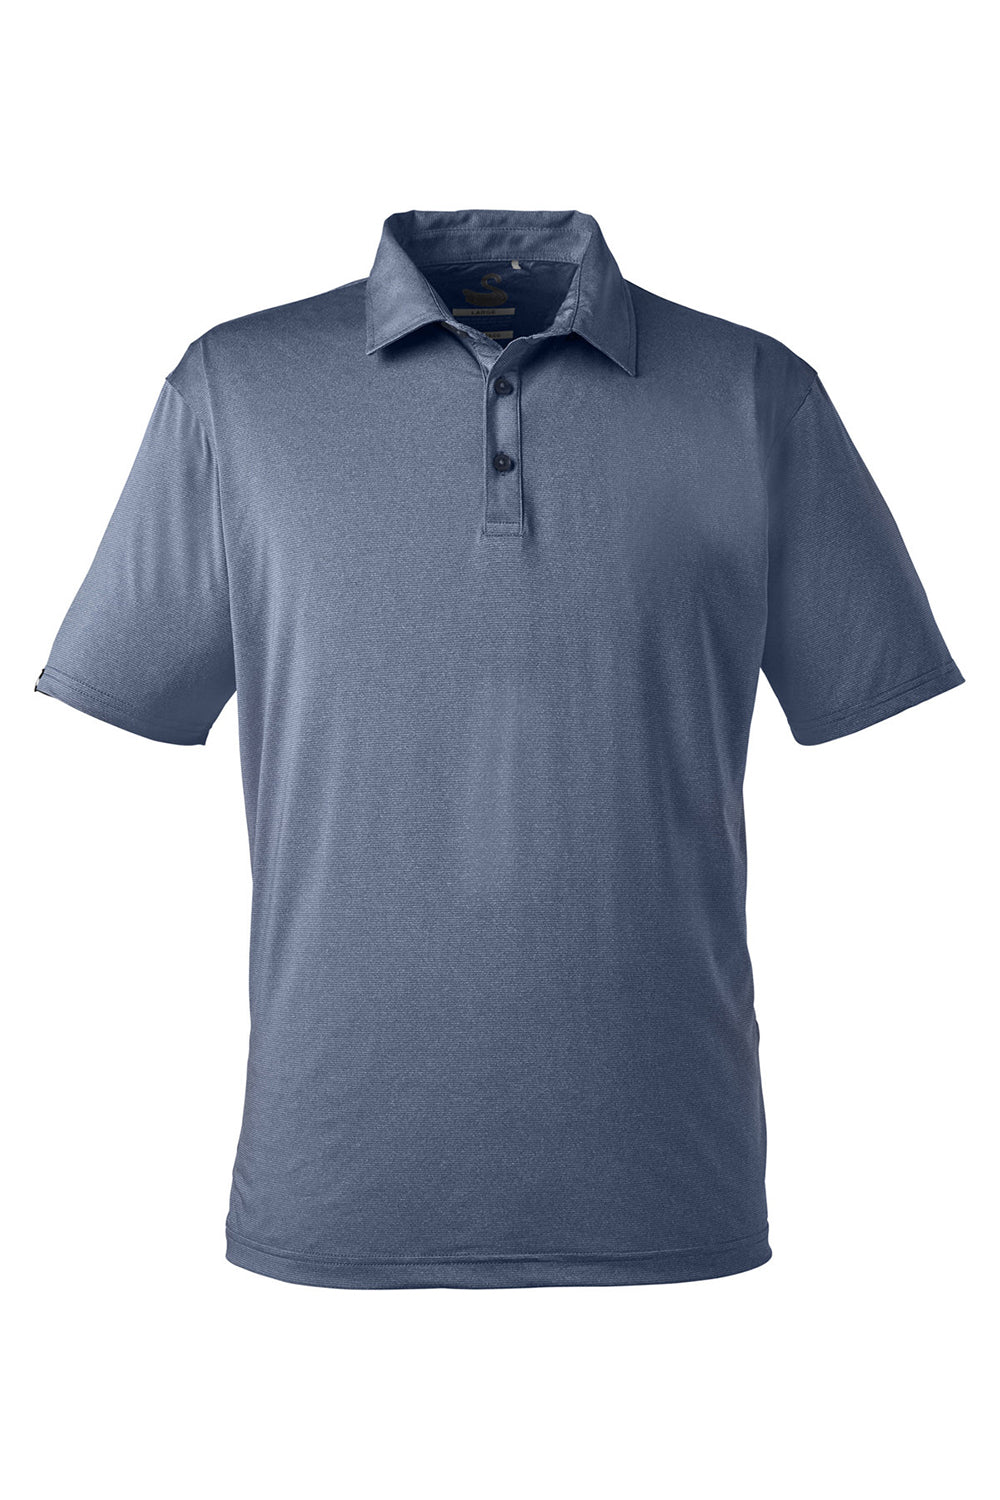 Swannies Golf SW1000 Mens Parker Short Sleeve Polo Shirt Navy Blue Flat Front